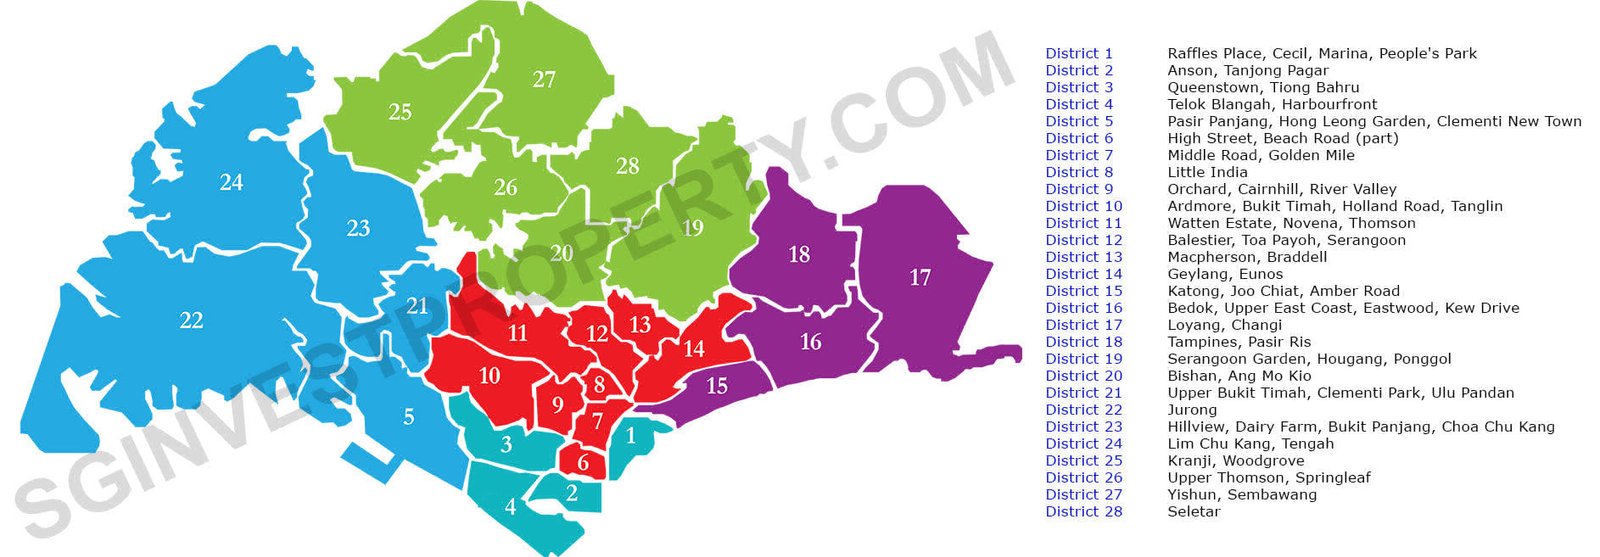 Singapore Districts